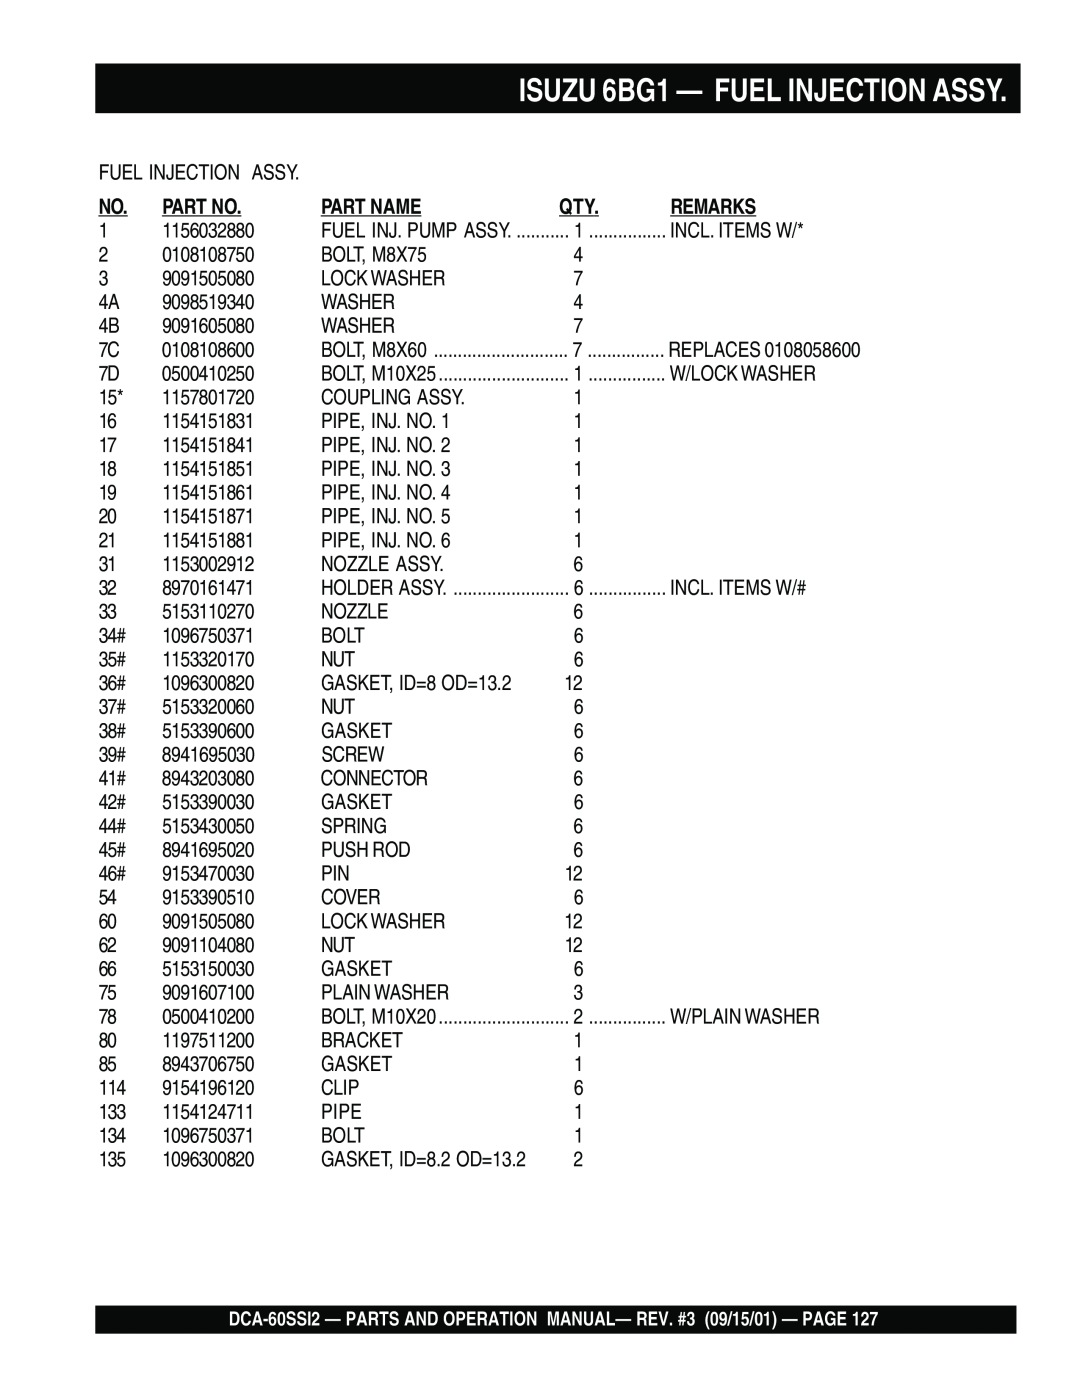 Multiquip DCA-60SS12 operation manual ISUZU 6BG1 — FUEL INJECTION ASSY, Part No, Part Name, Remarks 